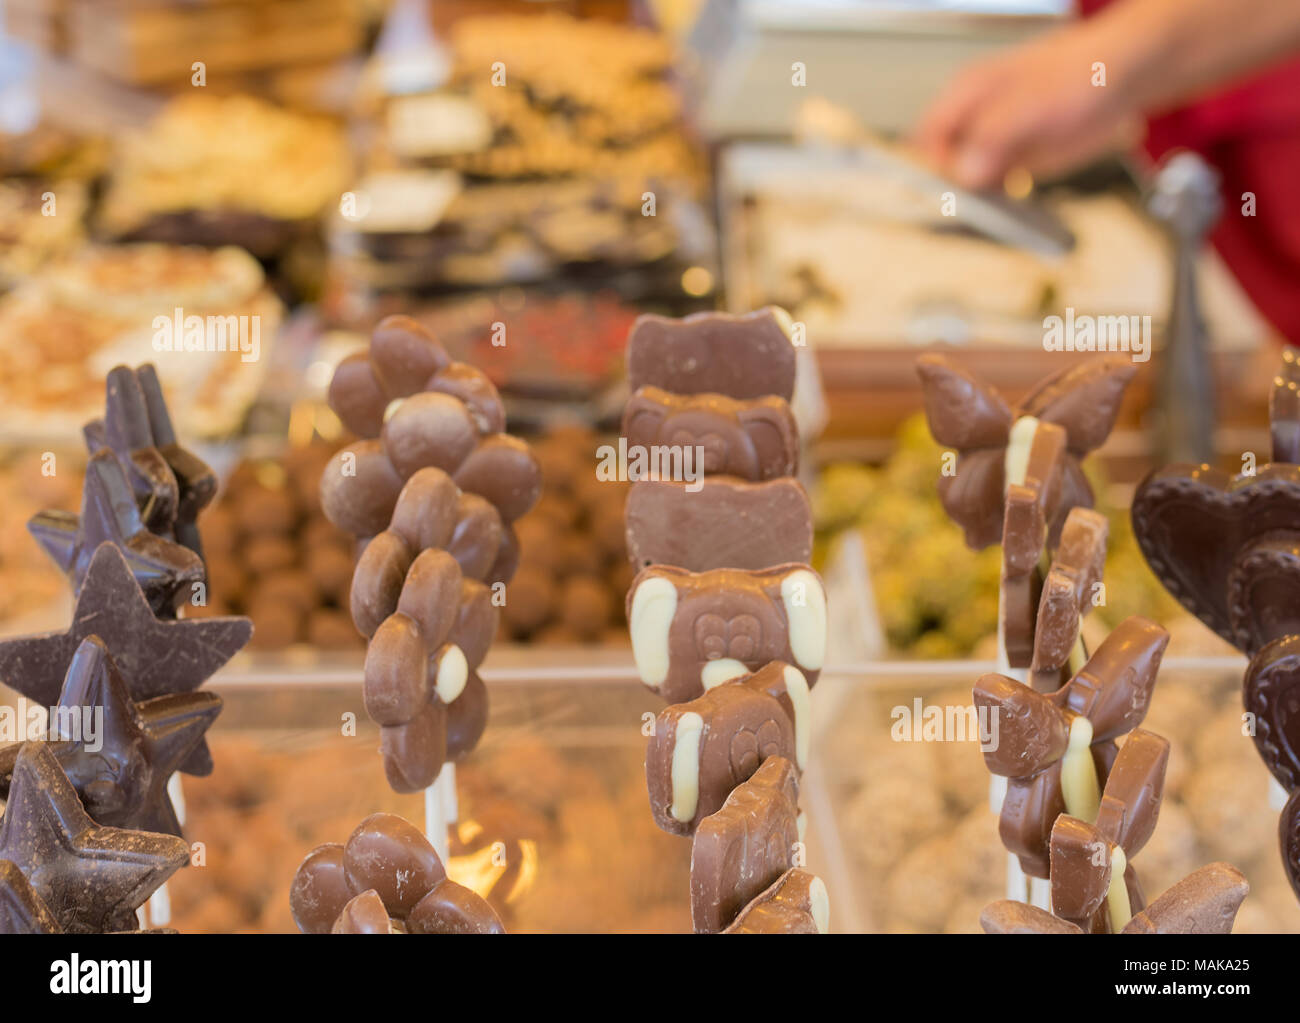 Chocolate sweets in the foreground and the chocolate market background Stock Photo